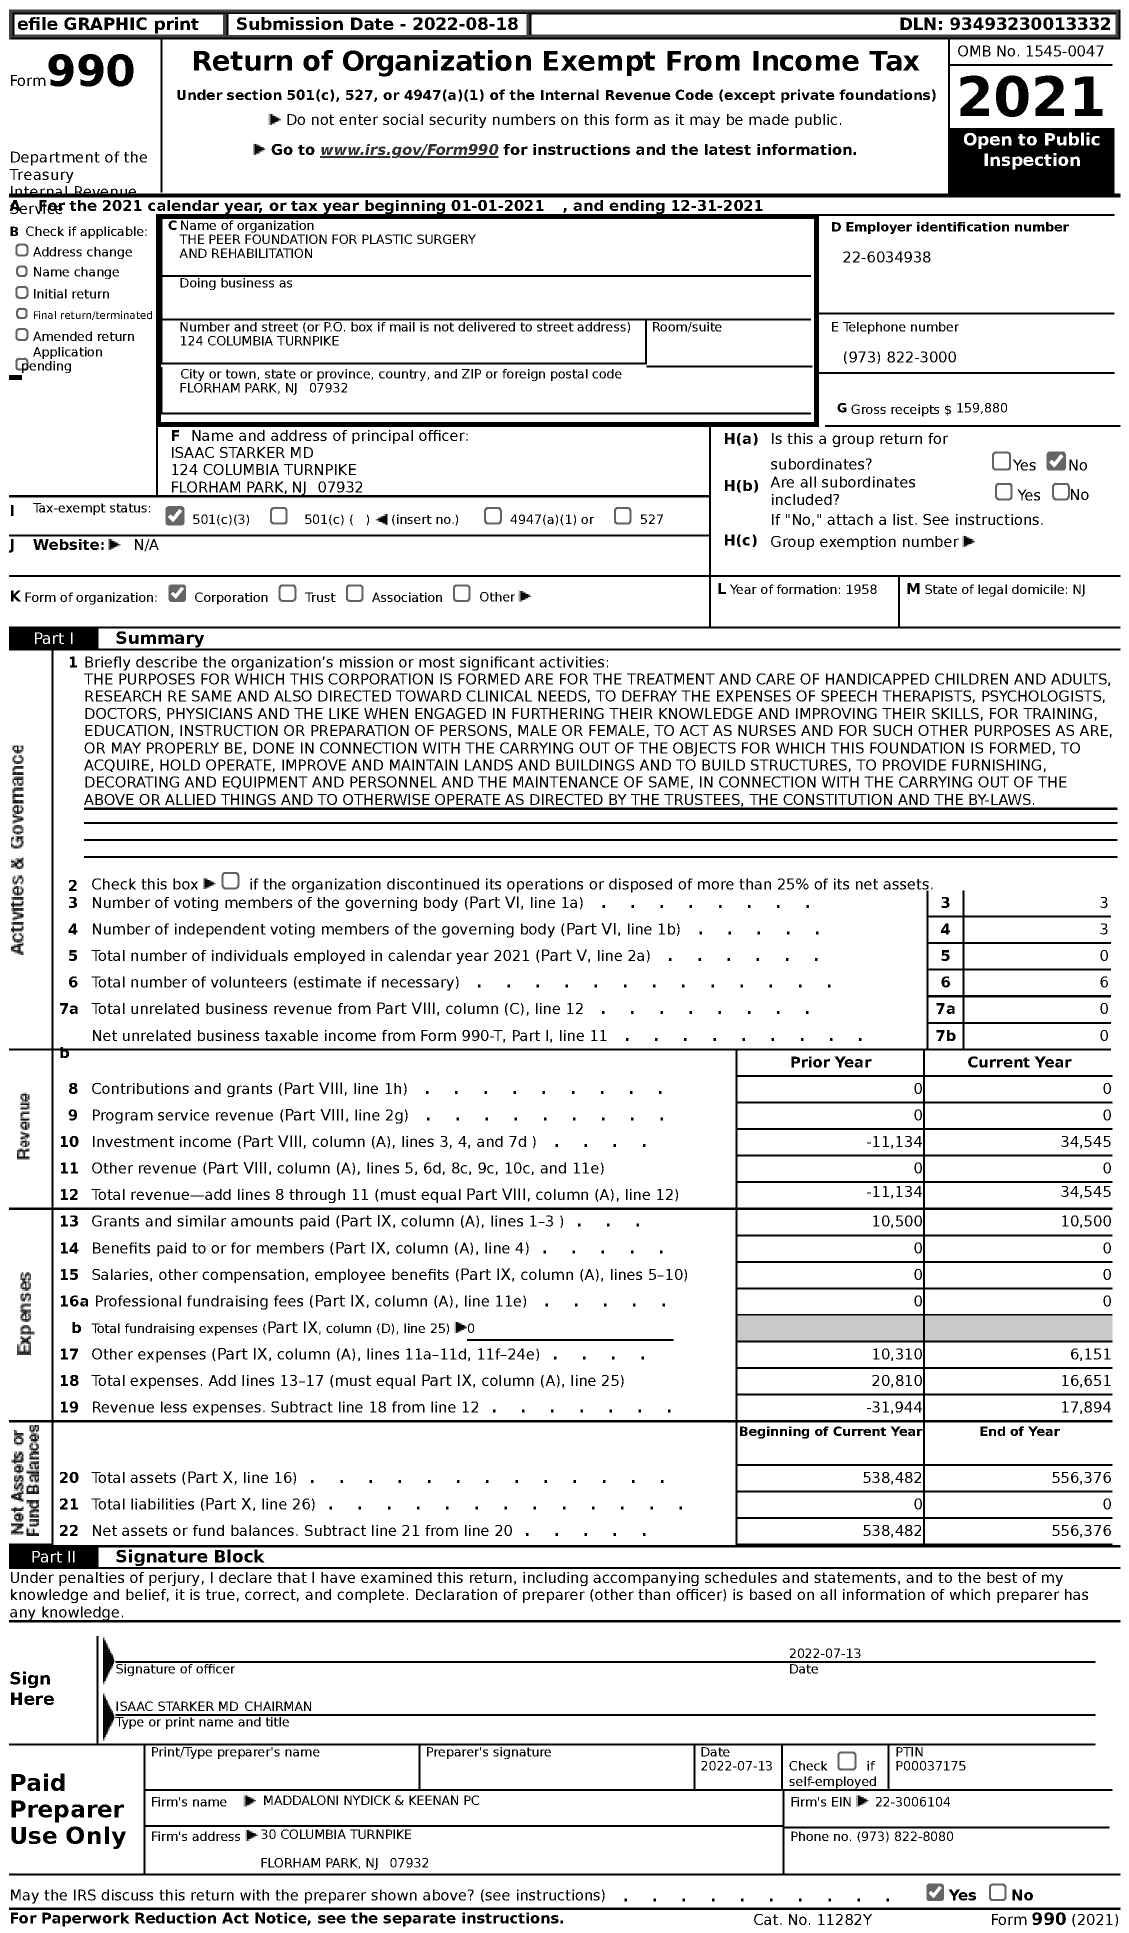 Image of first page of 2021 Form 990 for The Peer Foundation for Plastic Surgery and Rehabilitation